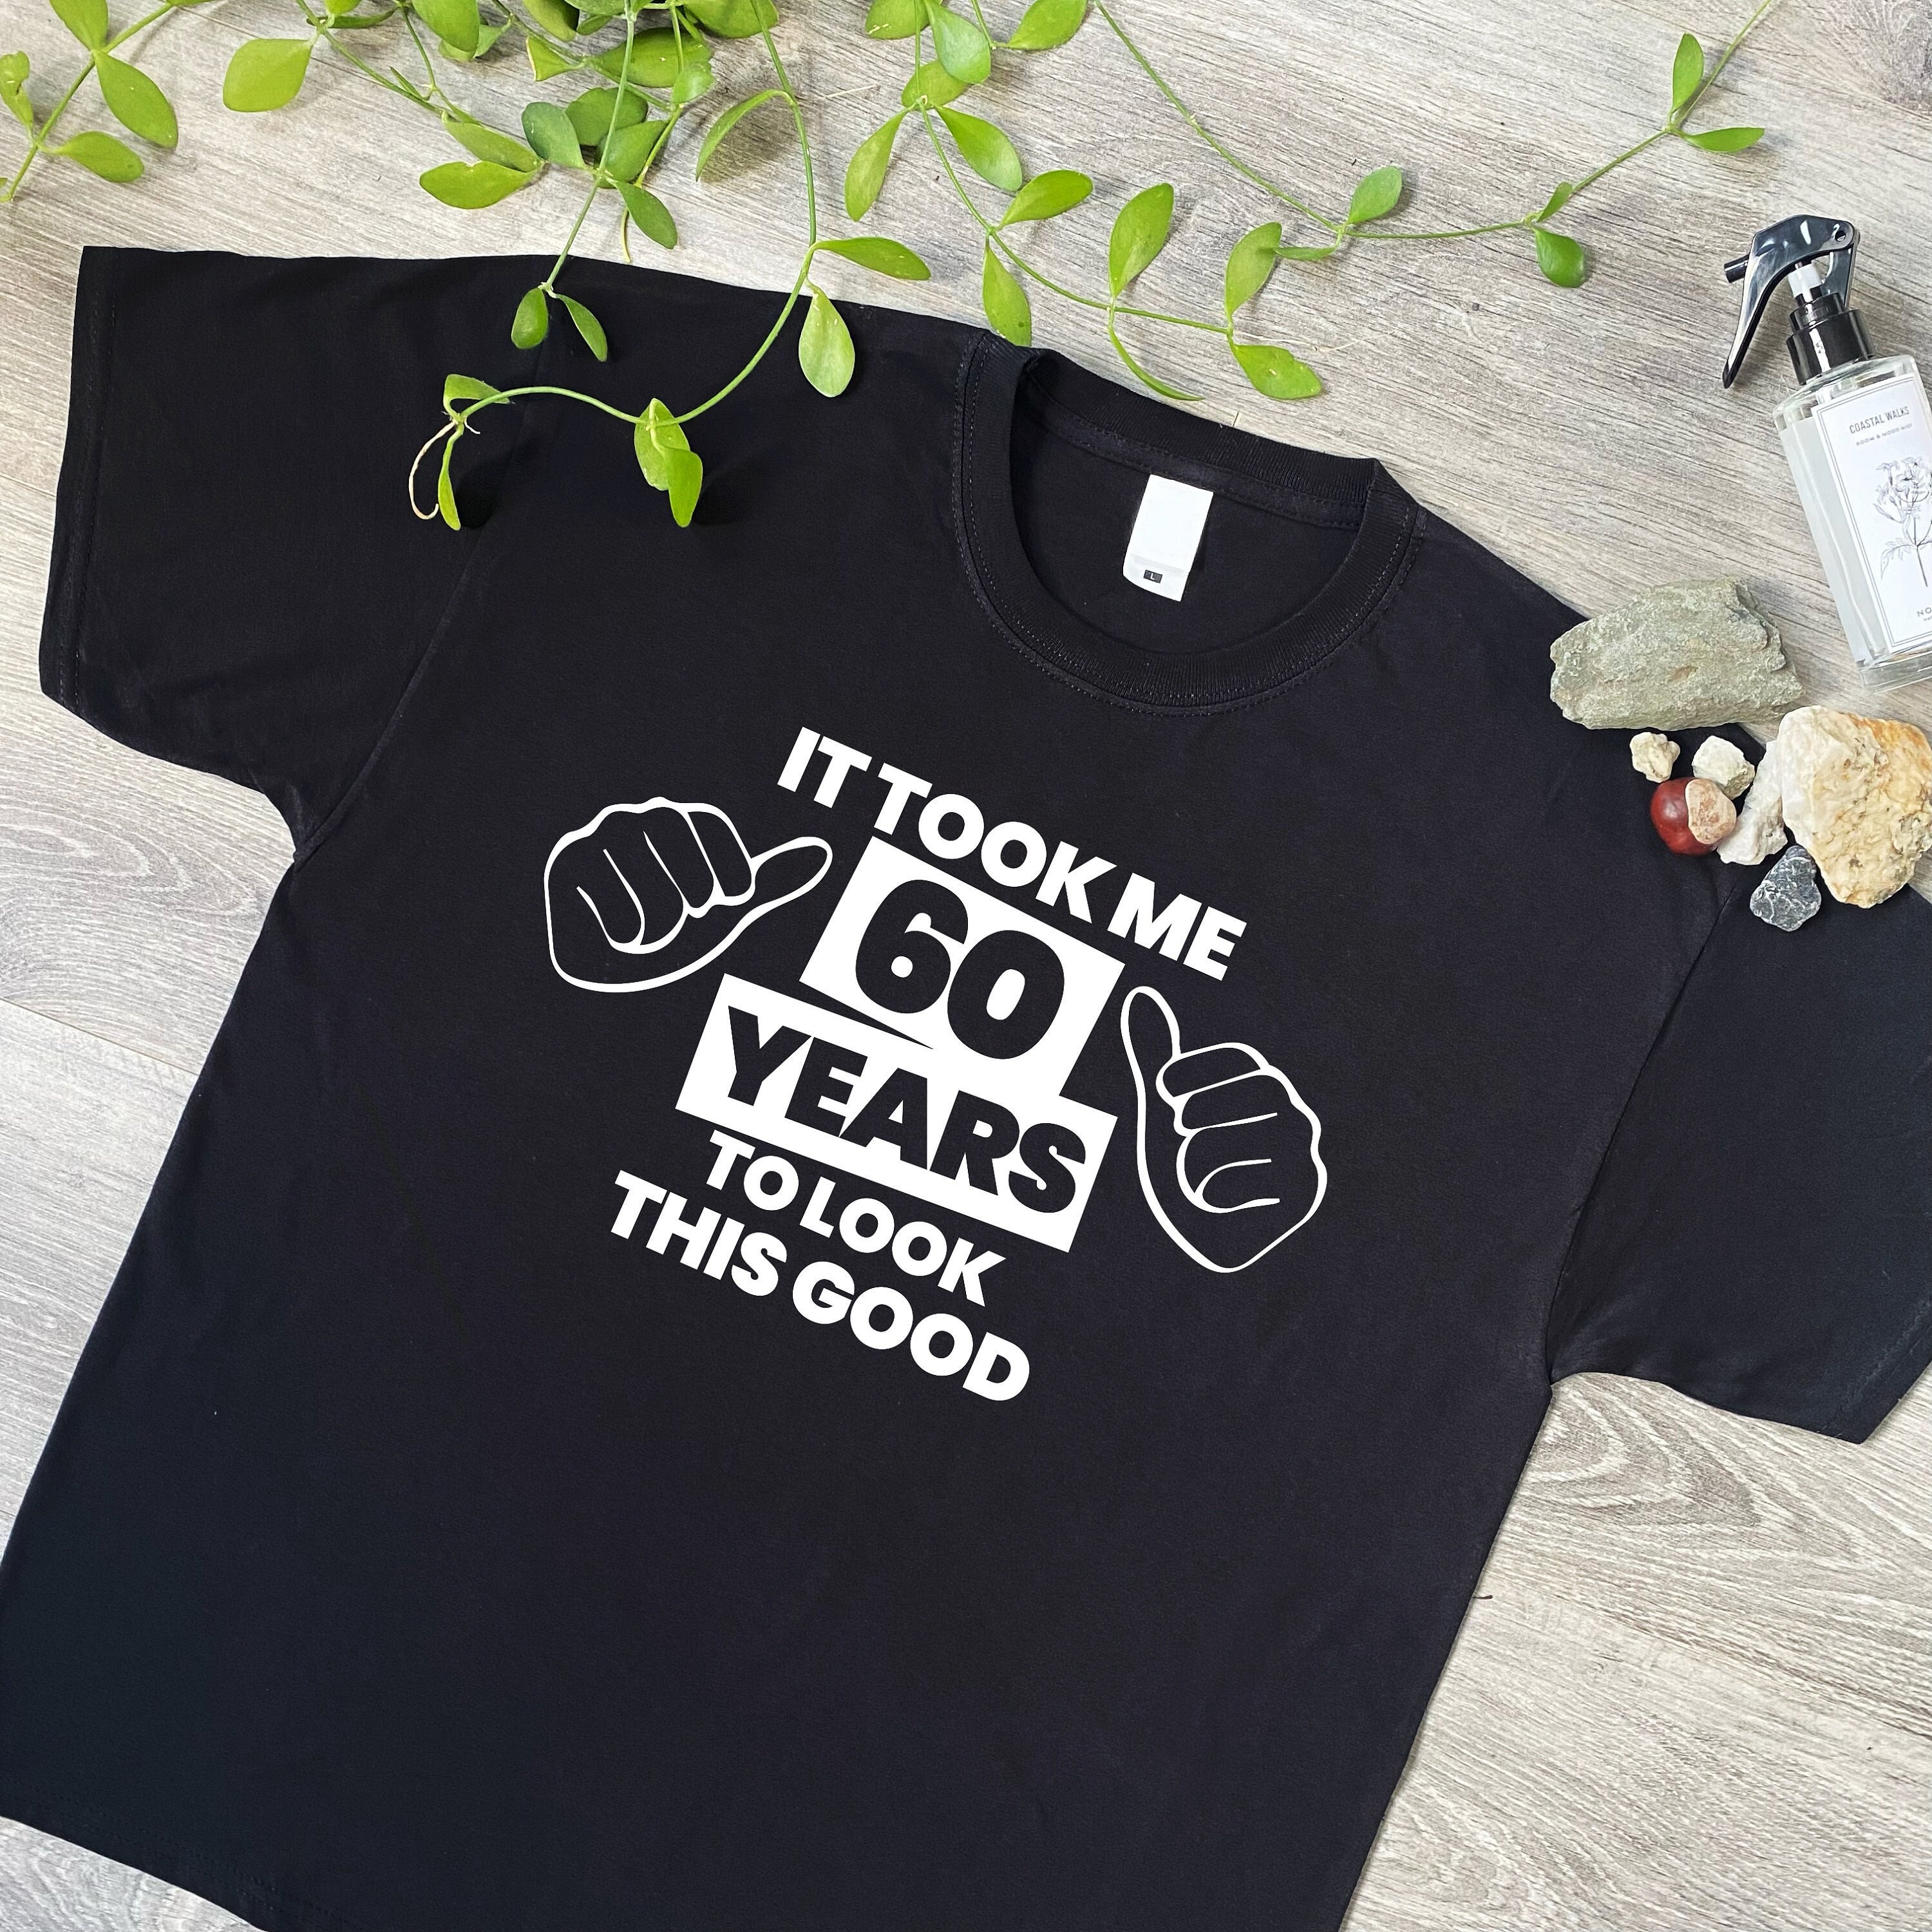 It Took Me 60 Years To Look This Good T Shirt, Funny Hands 60Th Birthday Gifts Tee Top For Men Or Women, Mum, Dad, Grandad Card Old Man, 454